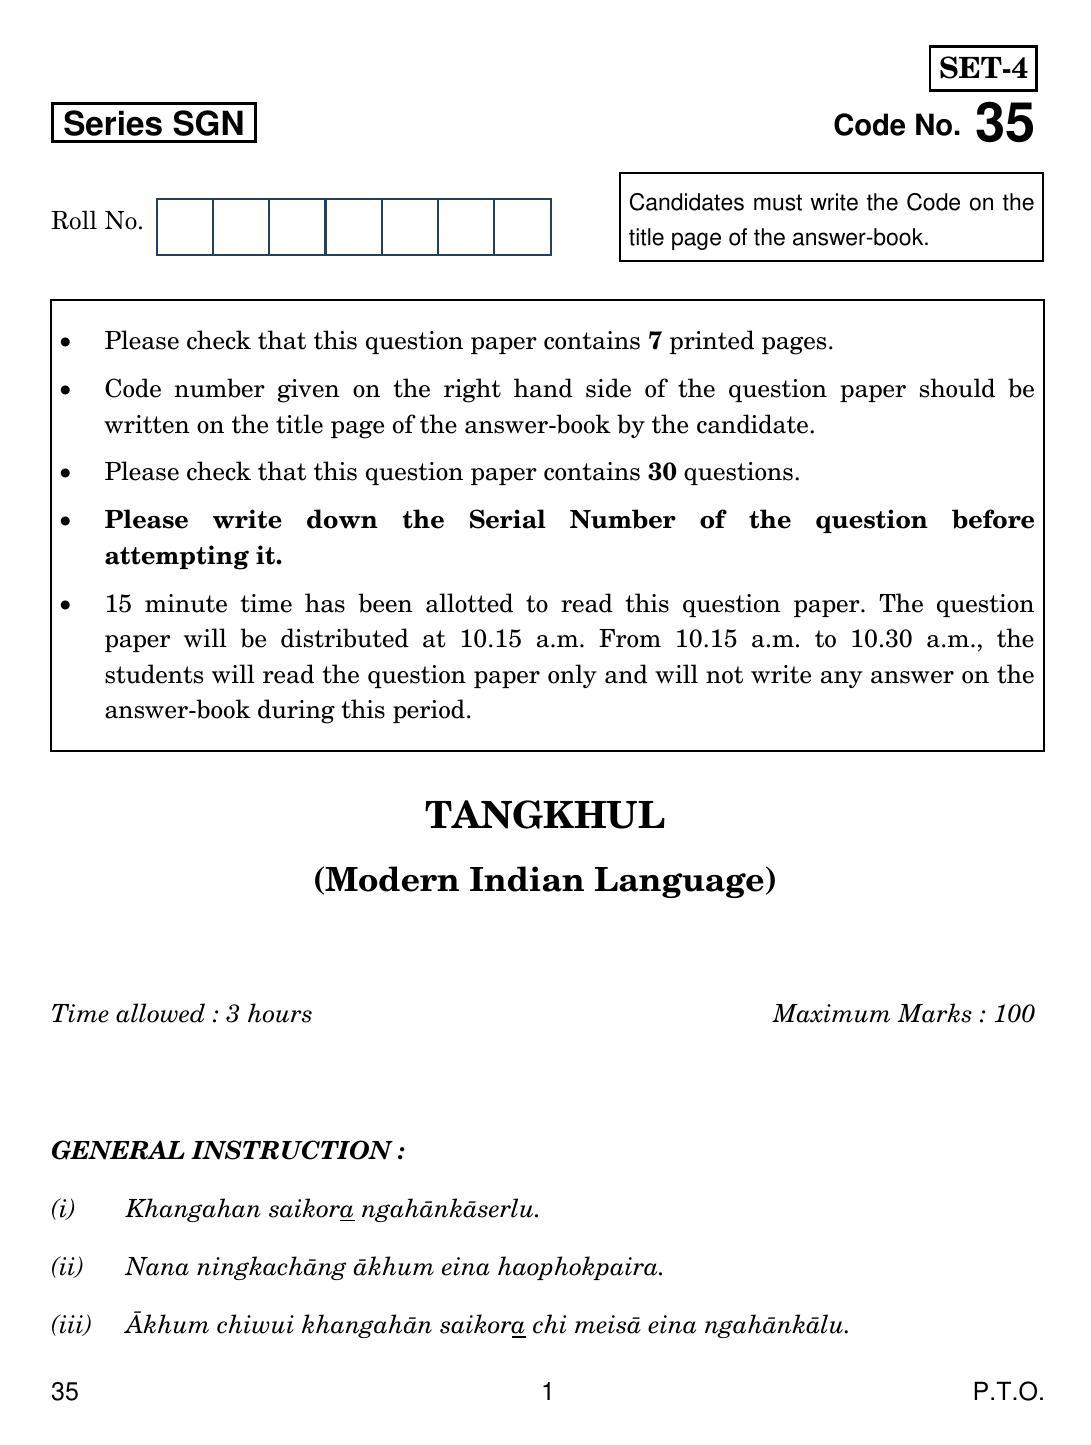 CBSE Class 12 35 TANGKHUL 2018 Question Paper - Page 1